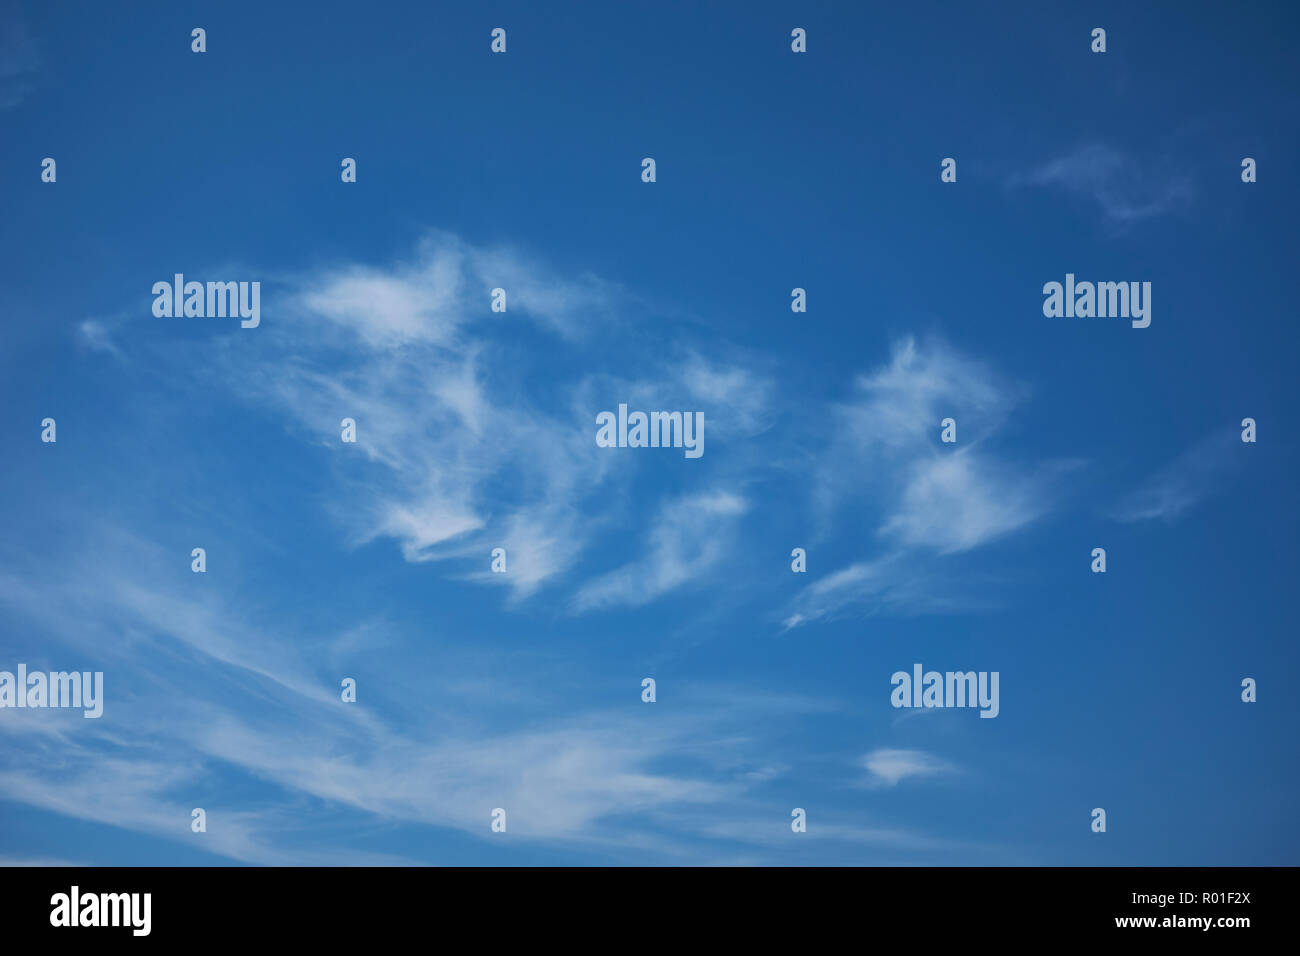 Blue sky with a small amount of thin white clouds Stock Photo